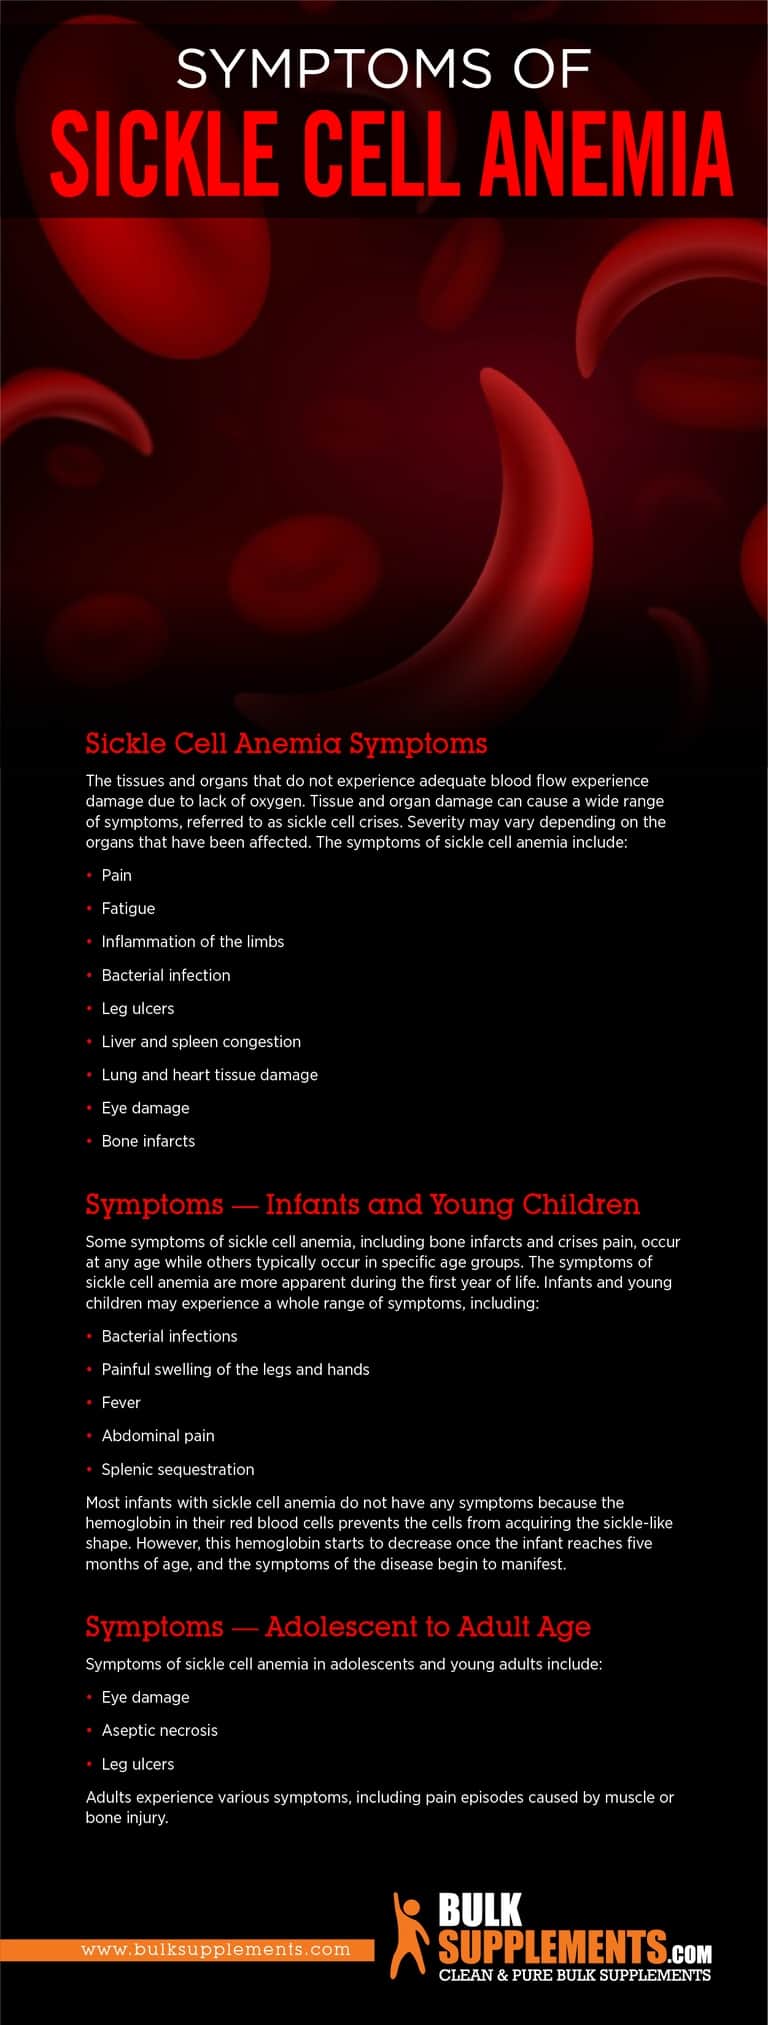 Sickle Cell Anemia Symptoms Causes And Treatment By James Denlinger 3249